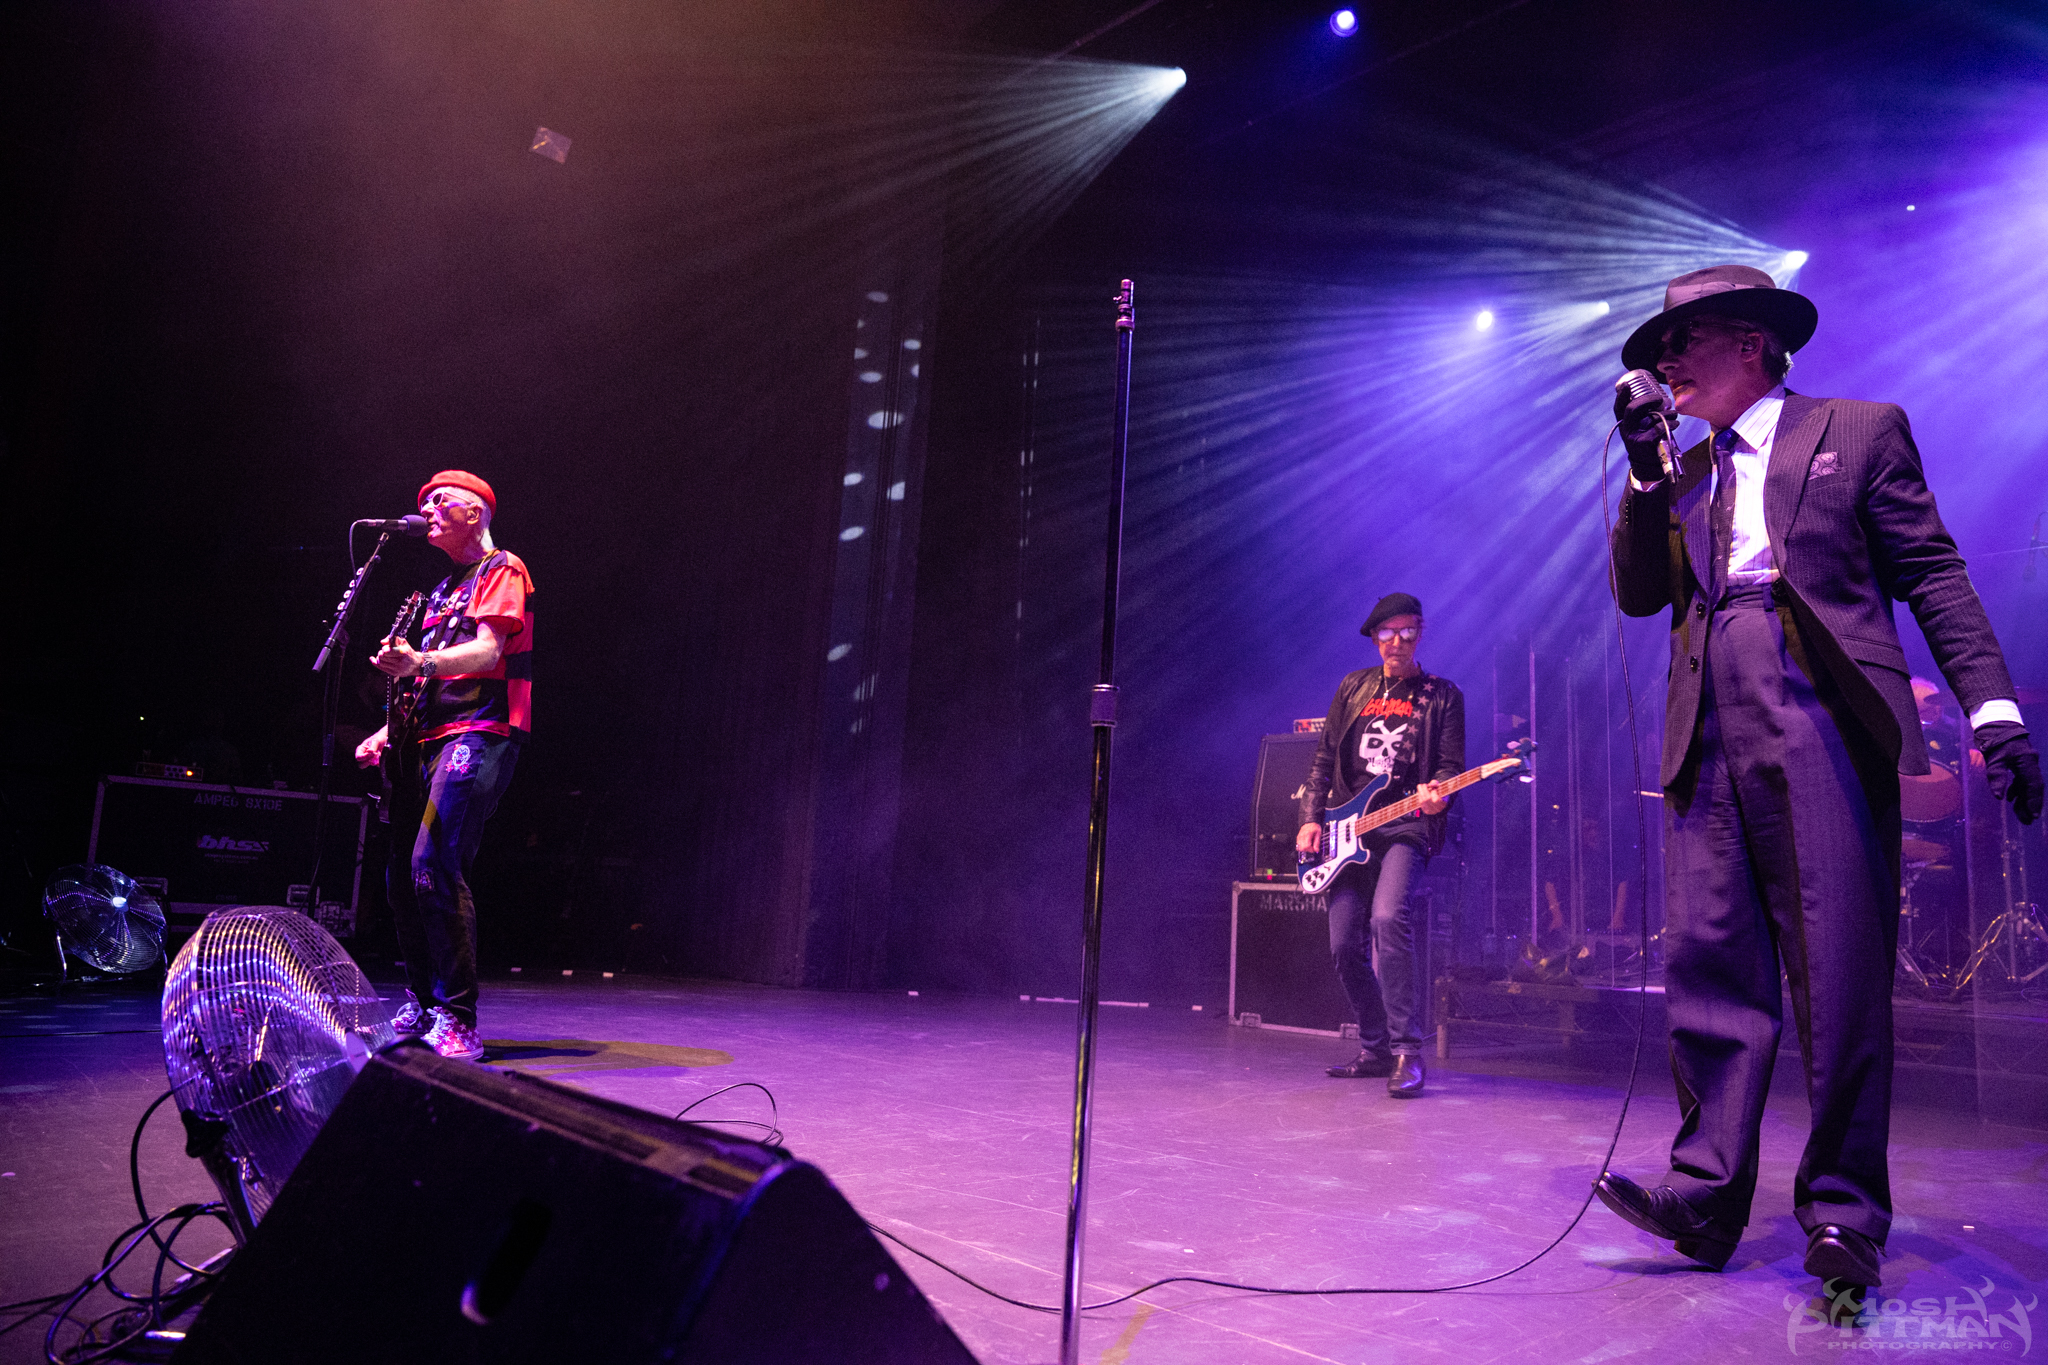 Gig review: The Damned + The Hard-Ons at the Enmore Theatre, Sydney